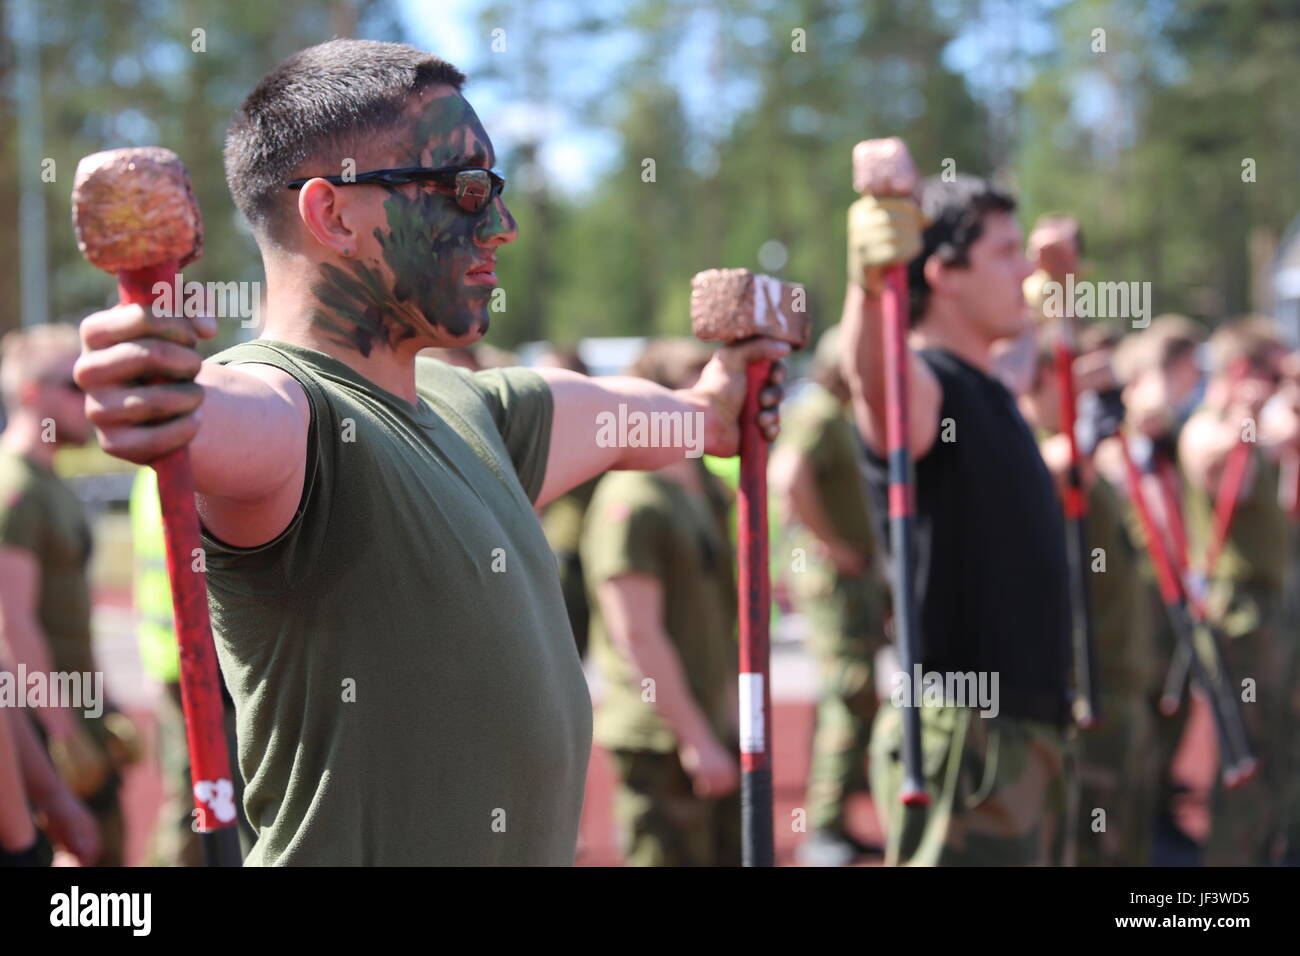 U.S. Marine Cpl. Eduardo Duran-Espino, an infantryman with Marine Rotational Force Europe 17.1, holds two hammers during the Viking Challenge, May 24, at Rena Leir, Norway. The timed hammer strength event was the first of many during the Norwegian Telemark Battalion’s annual competition. After working with Telemark Bn. During Joint Viking, the Marines were invited to participate in the elite warrior festival. (U.S. Marine Corps photo by Staff Sgt. Michele Hunt) Stock Photo